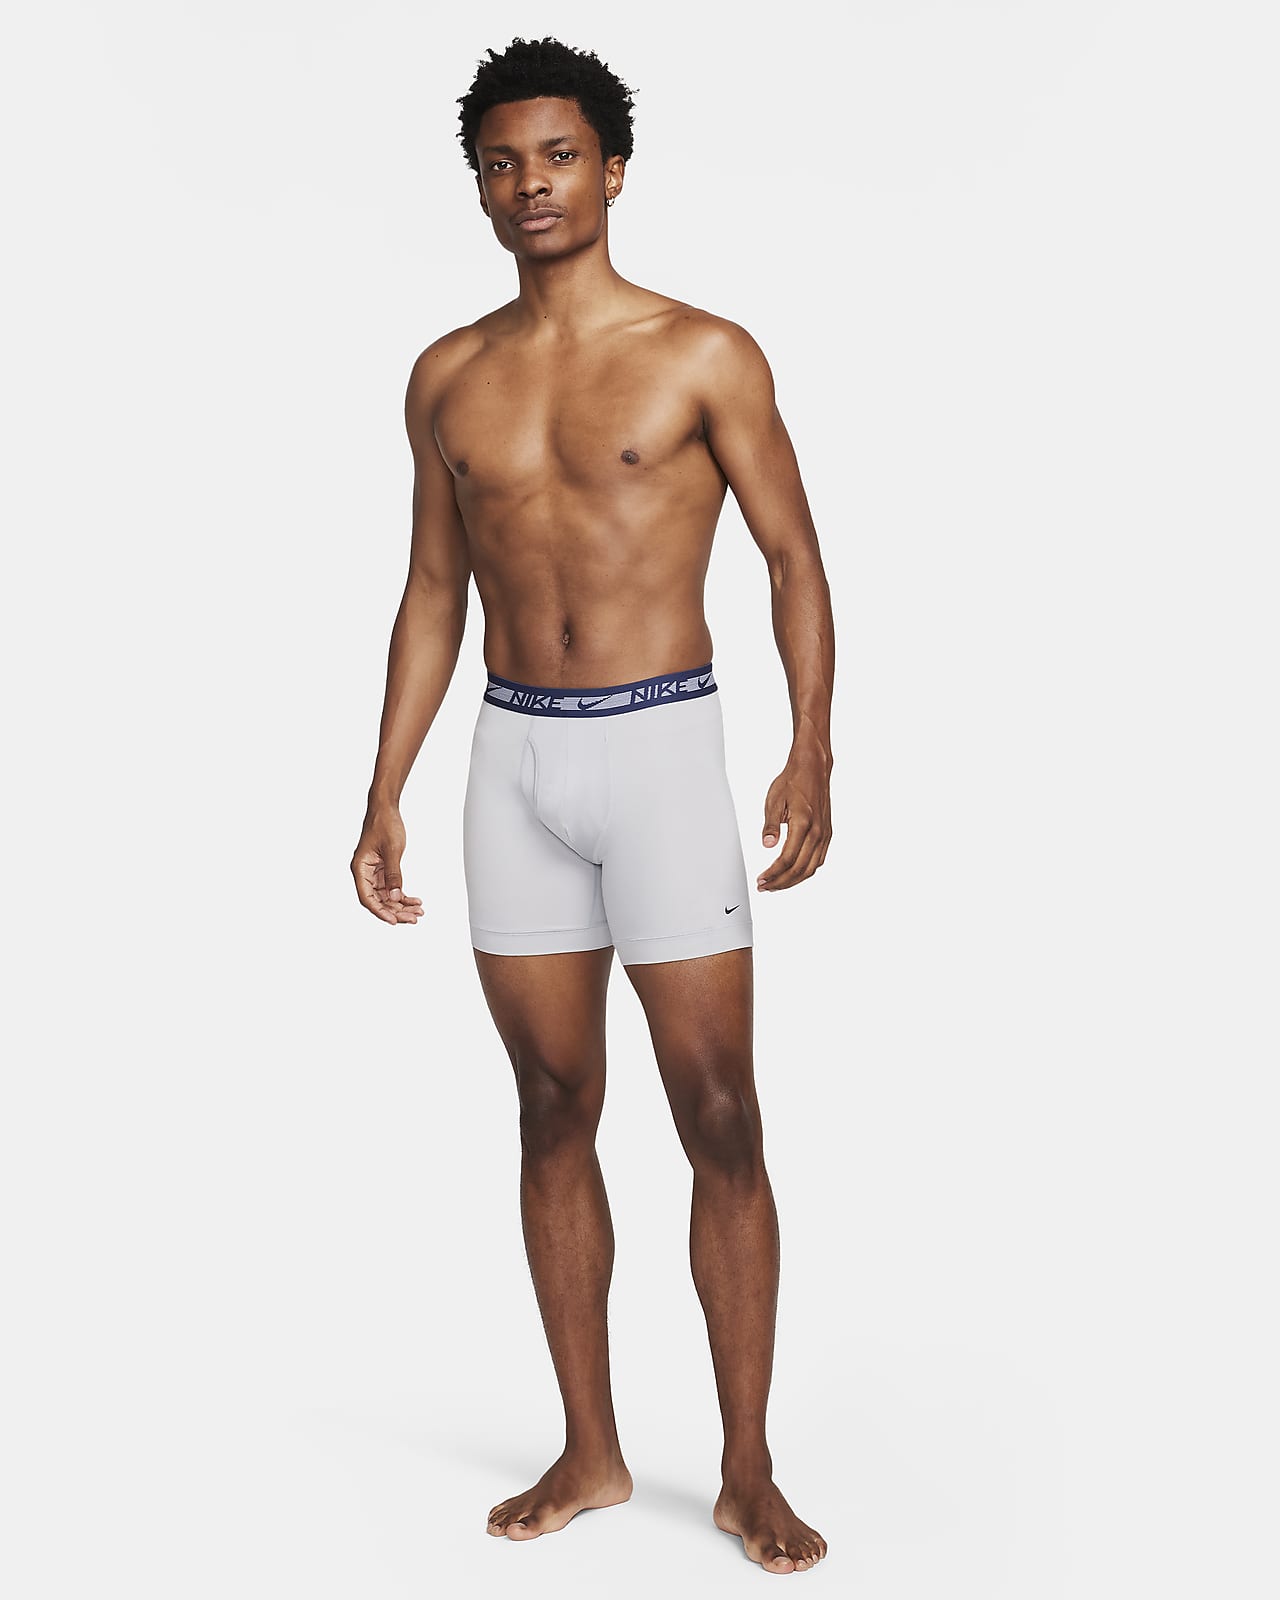 Custom Underwear: Exploring Fit, Style, And Brands